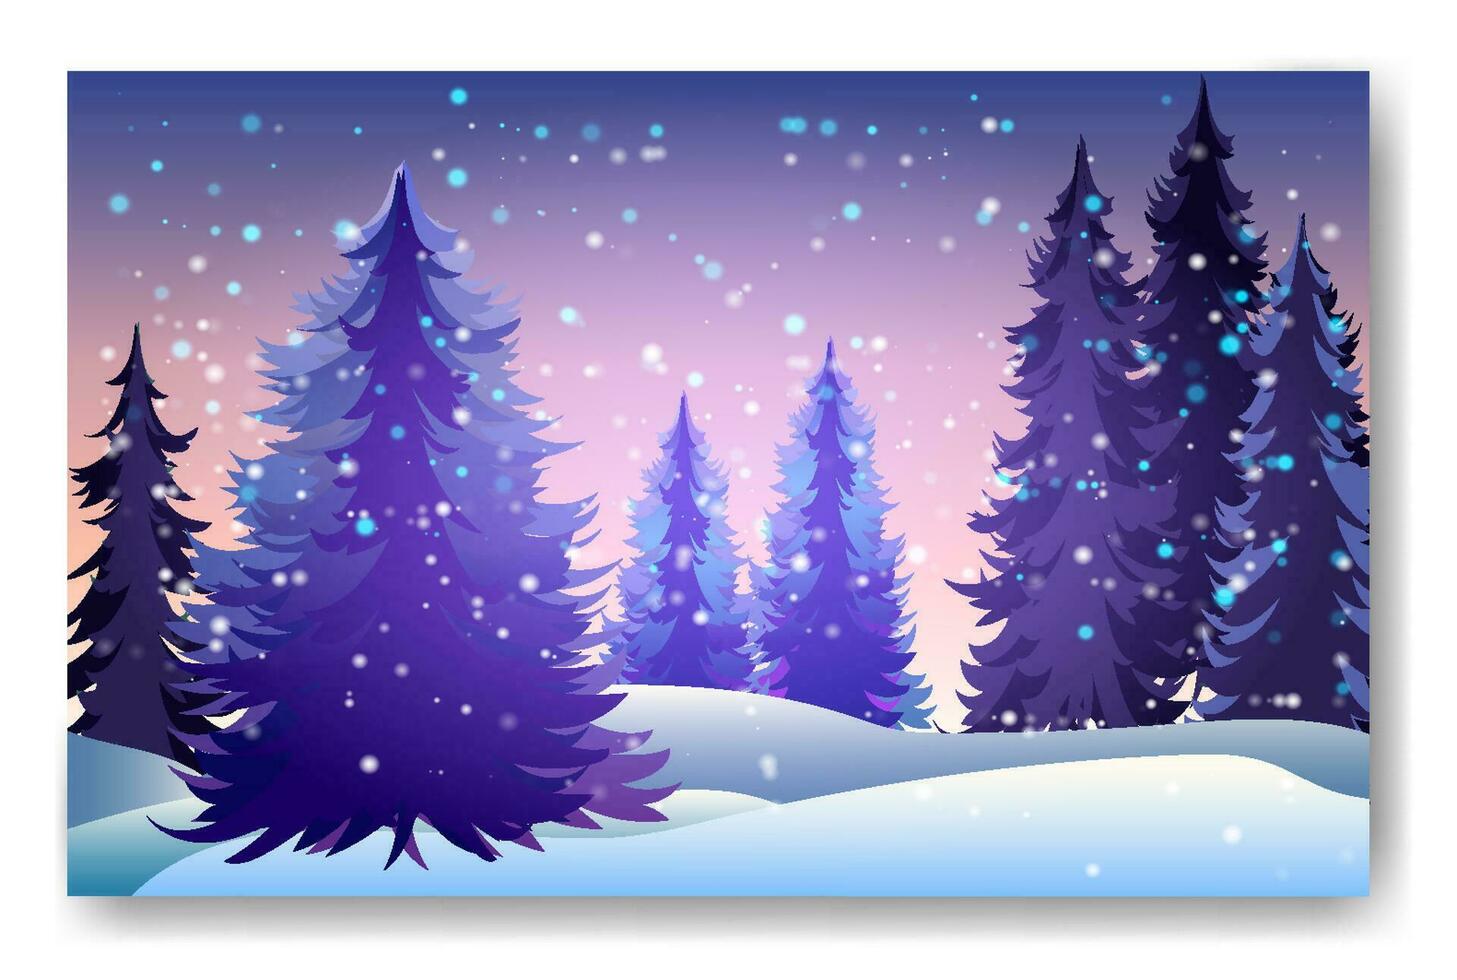 Winter background landscape with fir trees and pines in snow. Coniferous forest, night, sky, stars. Christmas Decoration. Vector illustration